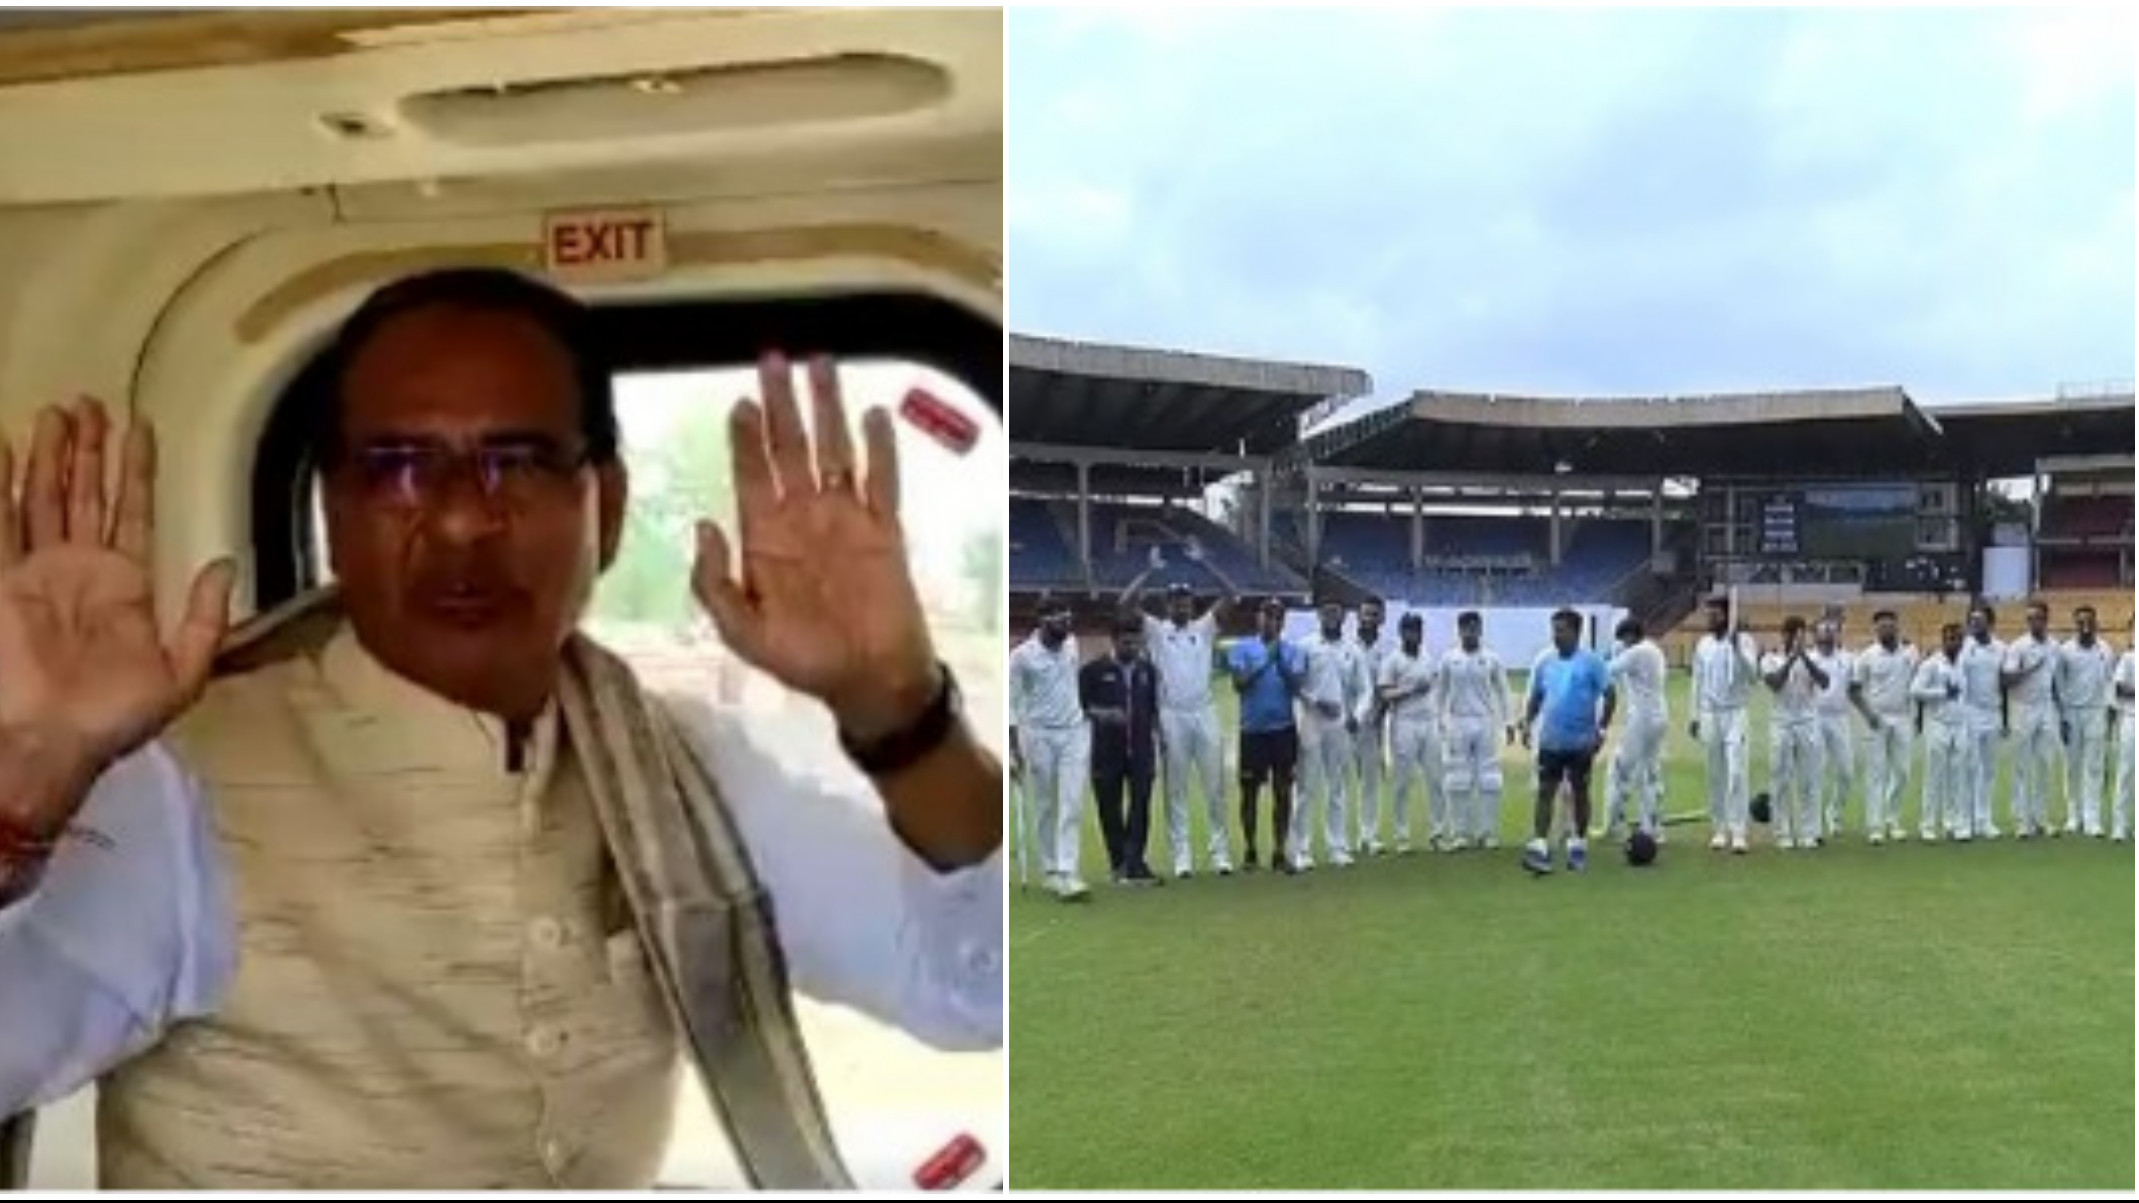 'The entire team will receive a grand welcome in Bhopal': Madhya Pradesh CM on state team’s Ranji Trophy 2022 win